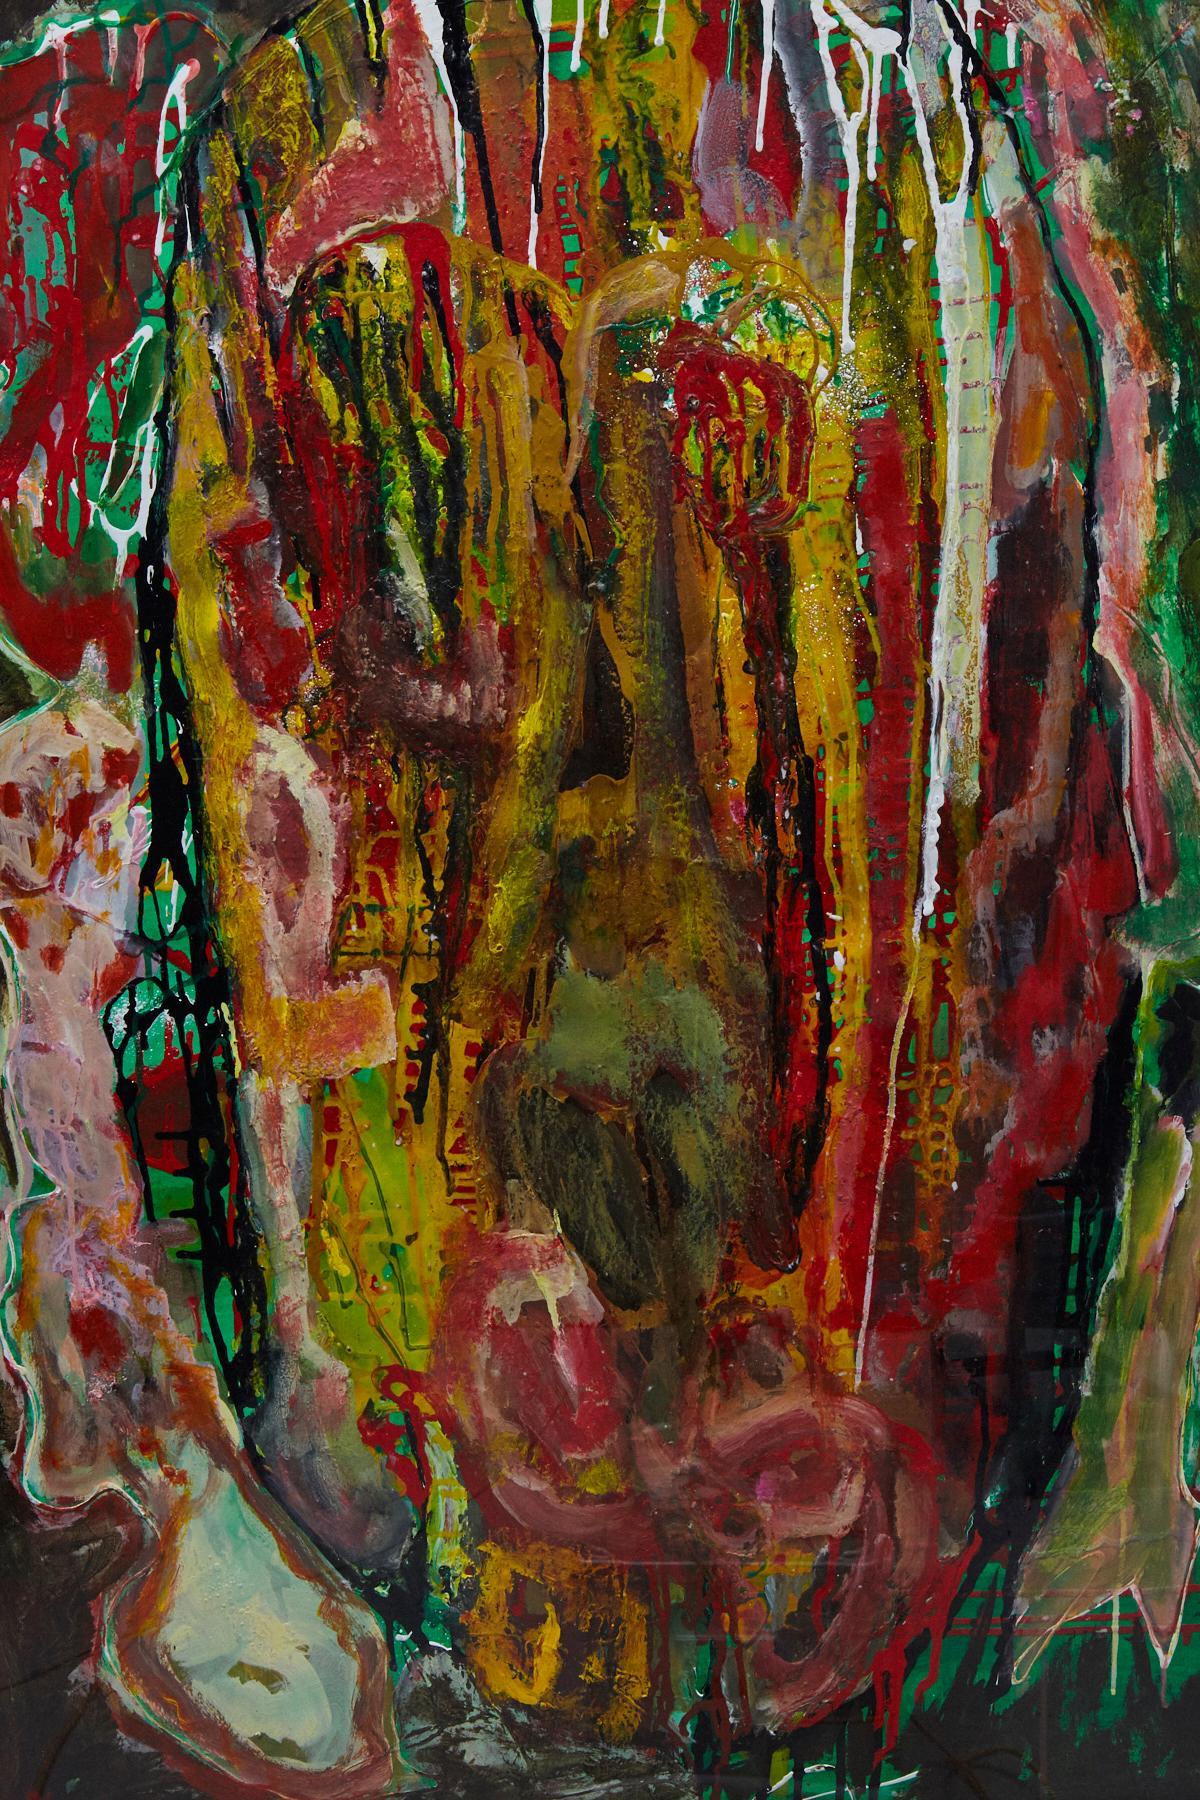 Life Does Not Care Whether You Like It Or Not - Abstract Expressionist Painting by Wyona Diskin